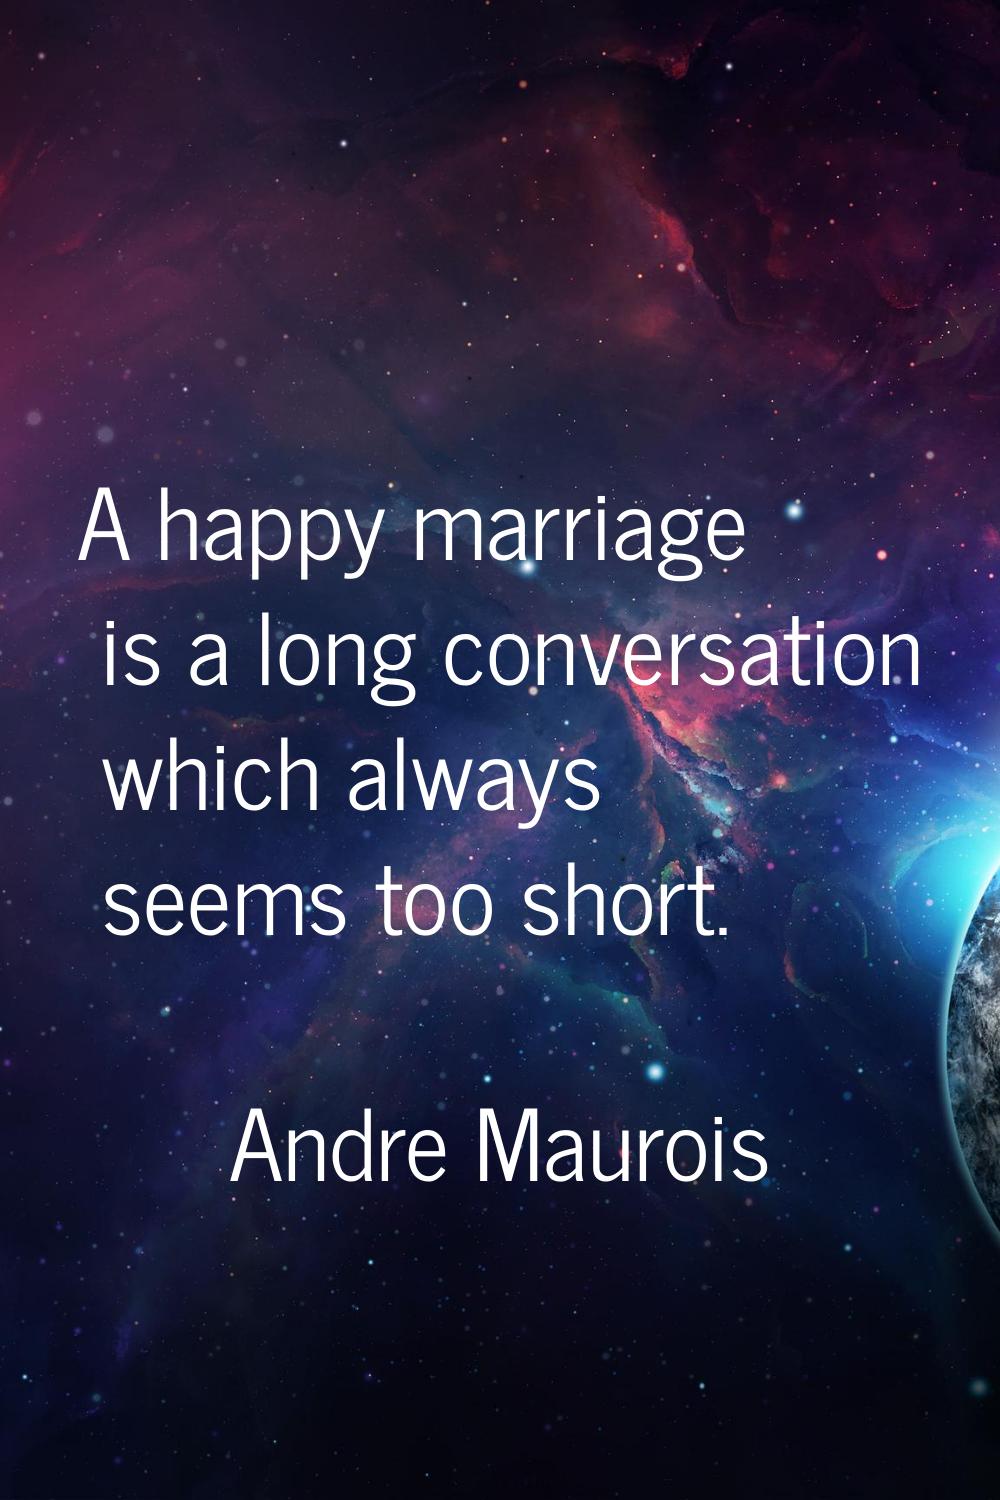 A happy marriage is a long conversation which always seems too short.